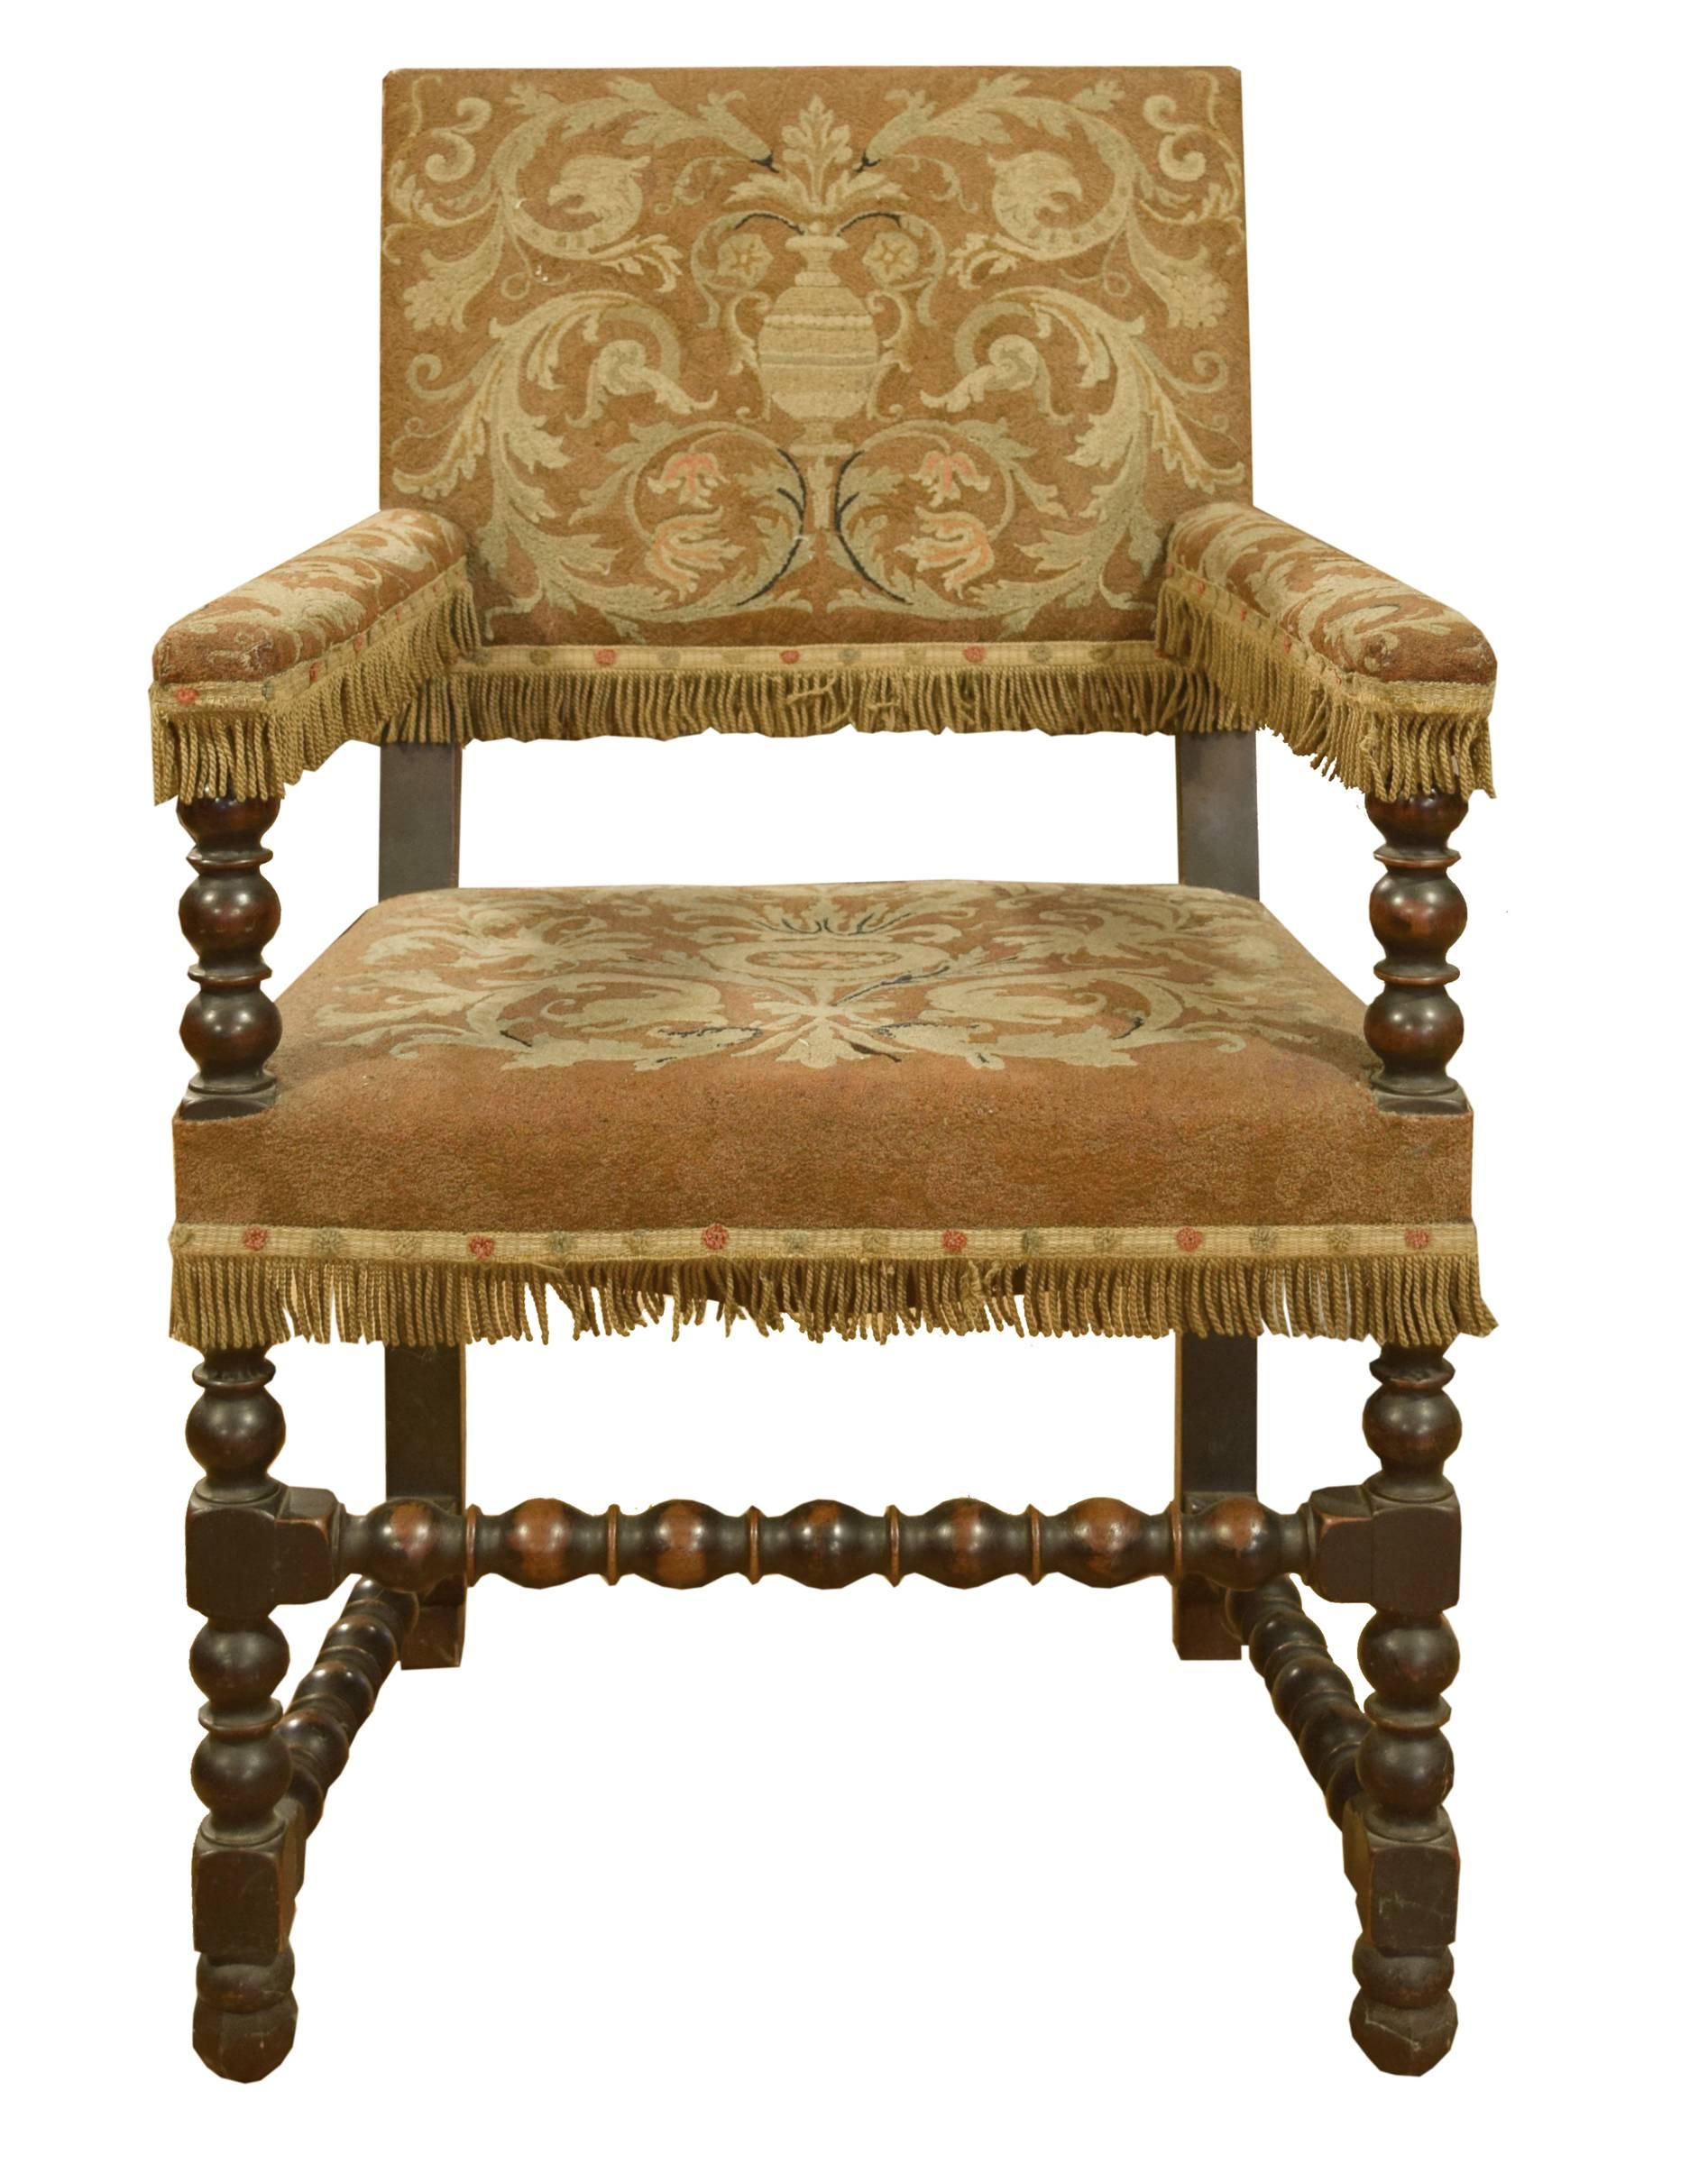 Set of twelve English Tudor style dining chairs, consisting of two armchairs and ten side chairs with turned legs and stretchers and embroidered upholstery with fringe trim. circa 1920.

Side chairs: 21" x 18" x 41"